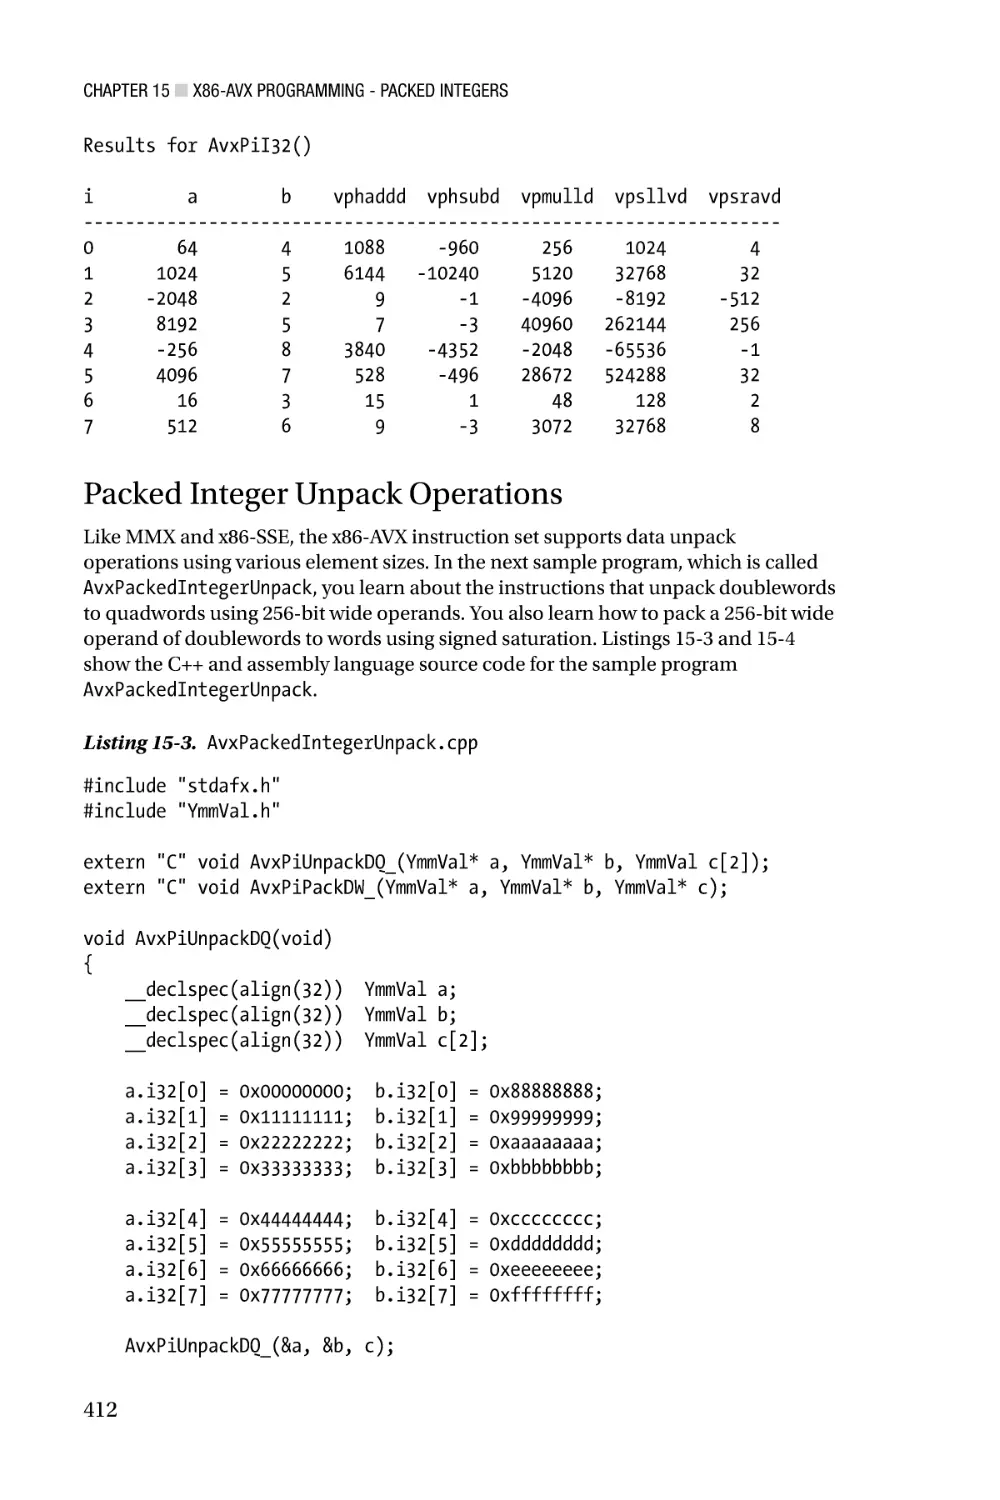 Packed Integer Unpack Operations